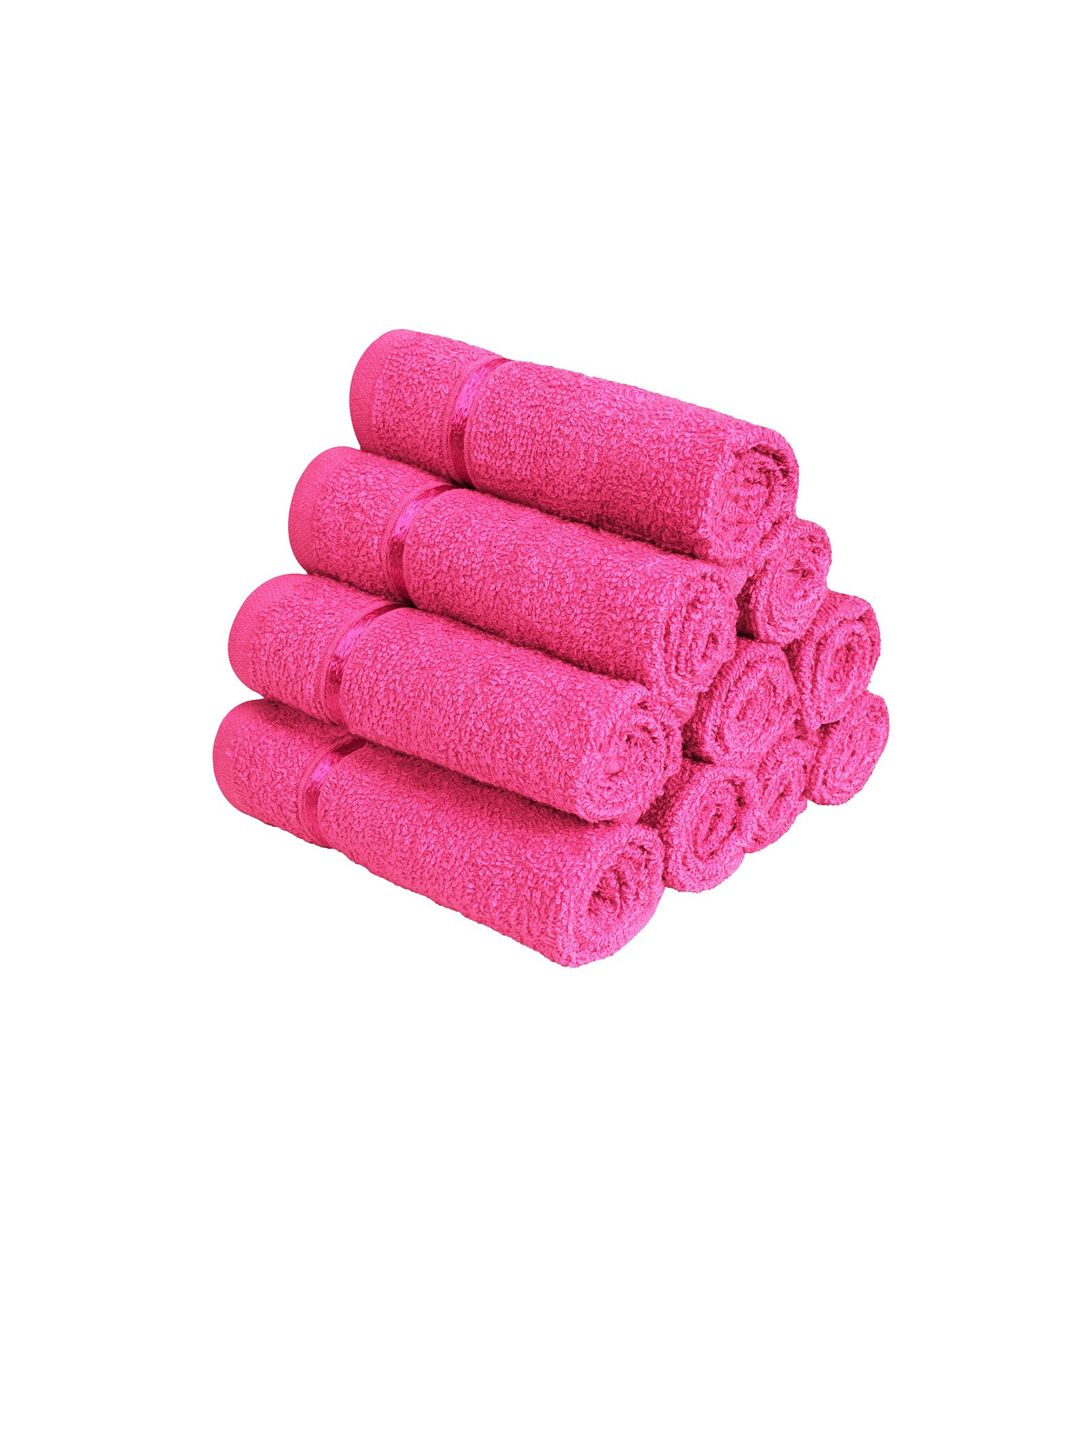 Story@home Set Of 10 Solid 450 GSM Pure Cotton Face Towels Price in India